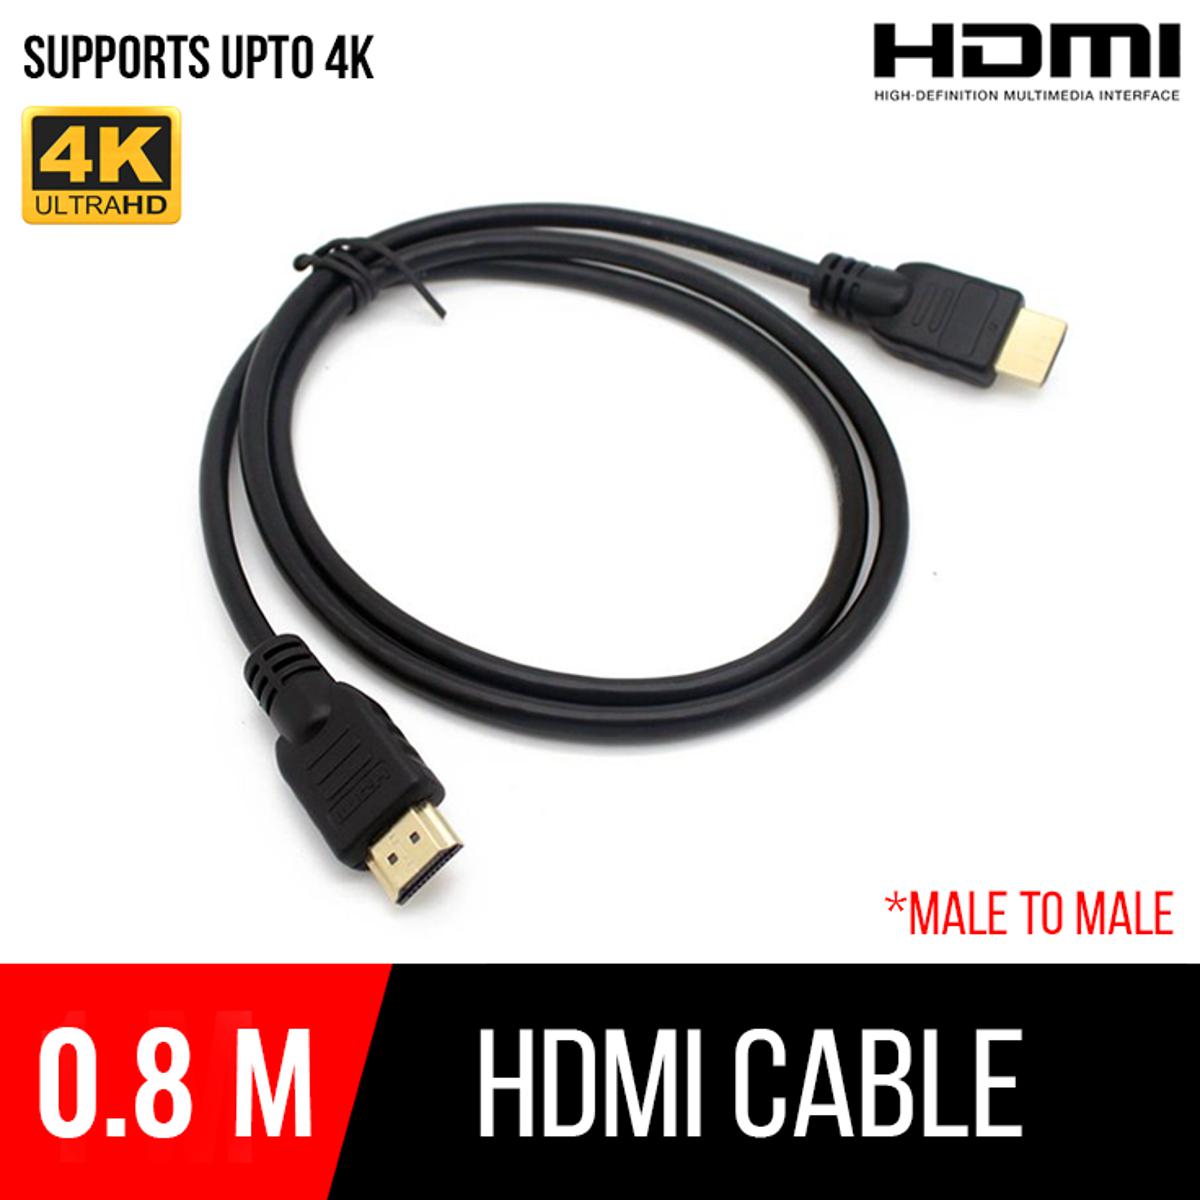 HDMI Cable 0.8m Support HD and 4K HDMI cable 0.8 meters HDMI Cable For Monitor PC Laptop Projector Television TV LED LCD Television HDMI Male to Male